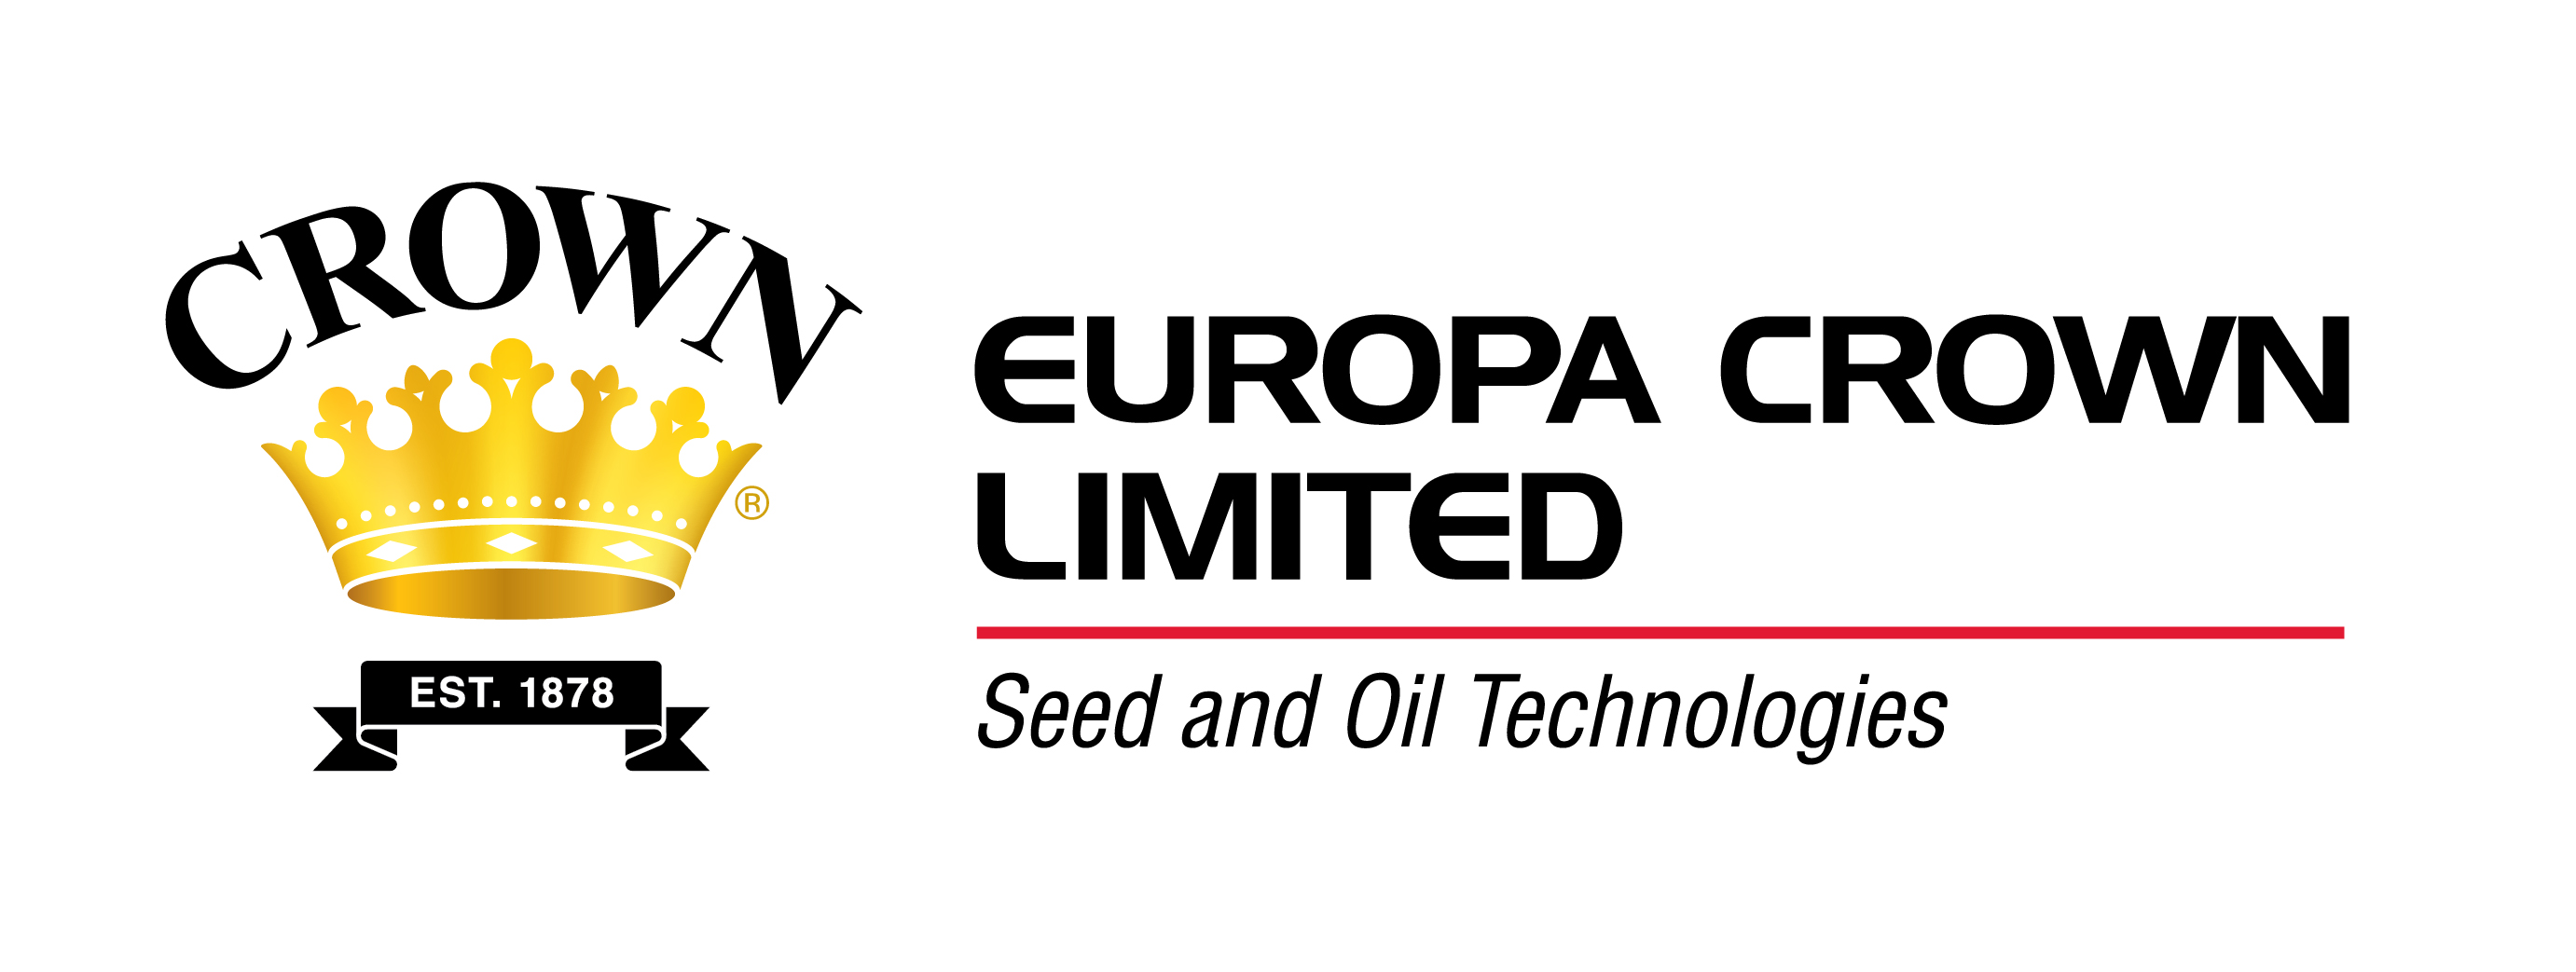 Europa Crown Ltd. oilseed extraction technology, refining, equipment. 